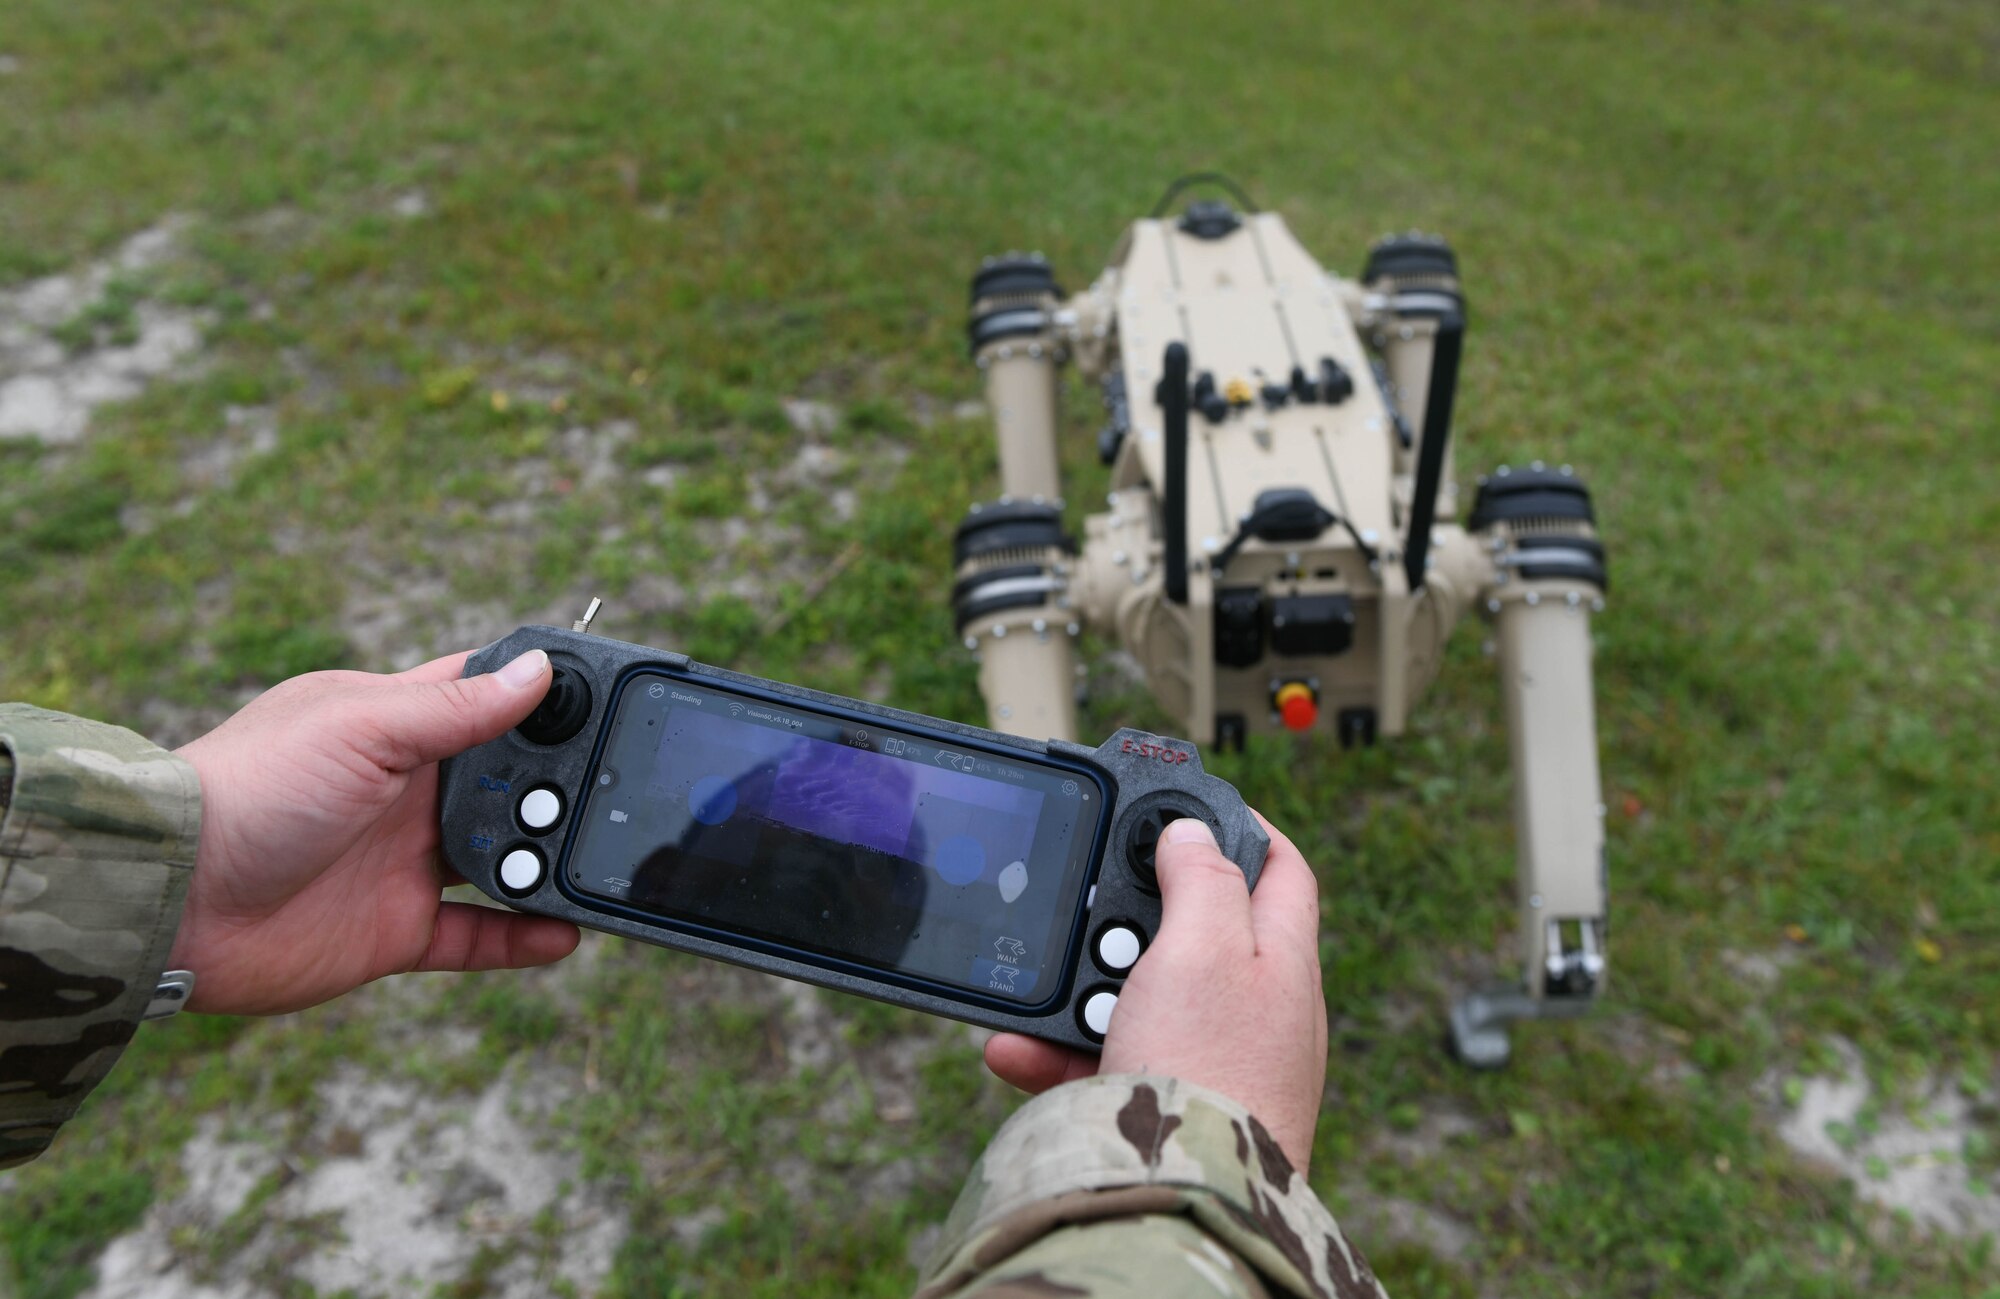 Master Sgt. Krystoffer Miller controls a robot dog by a hand-held controller